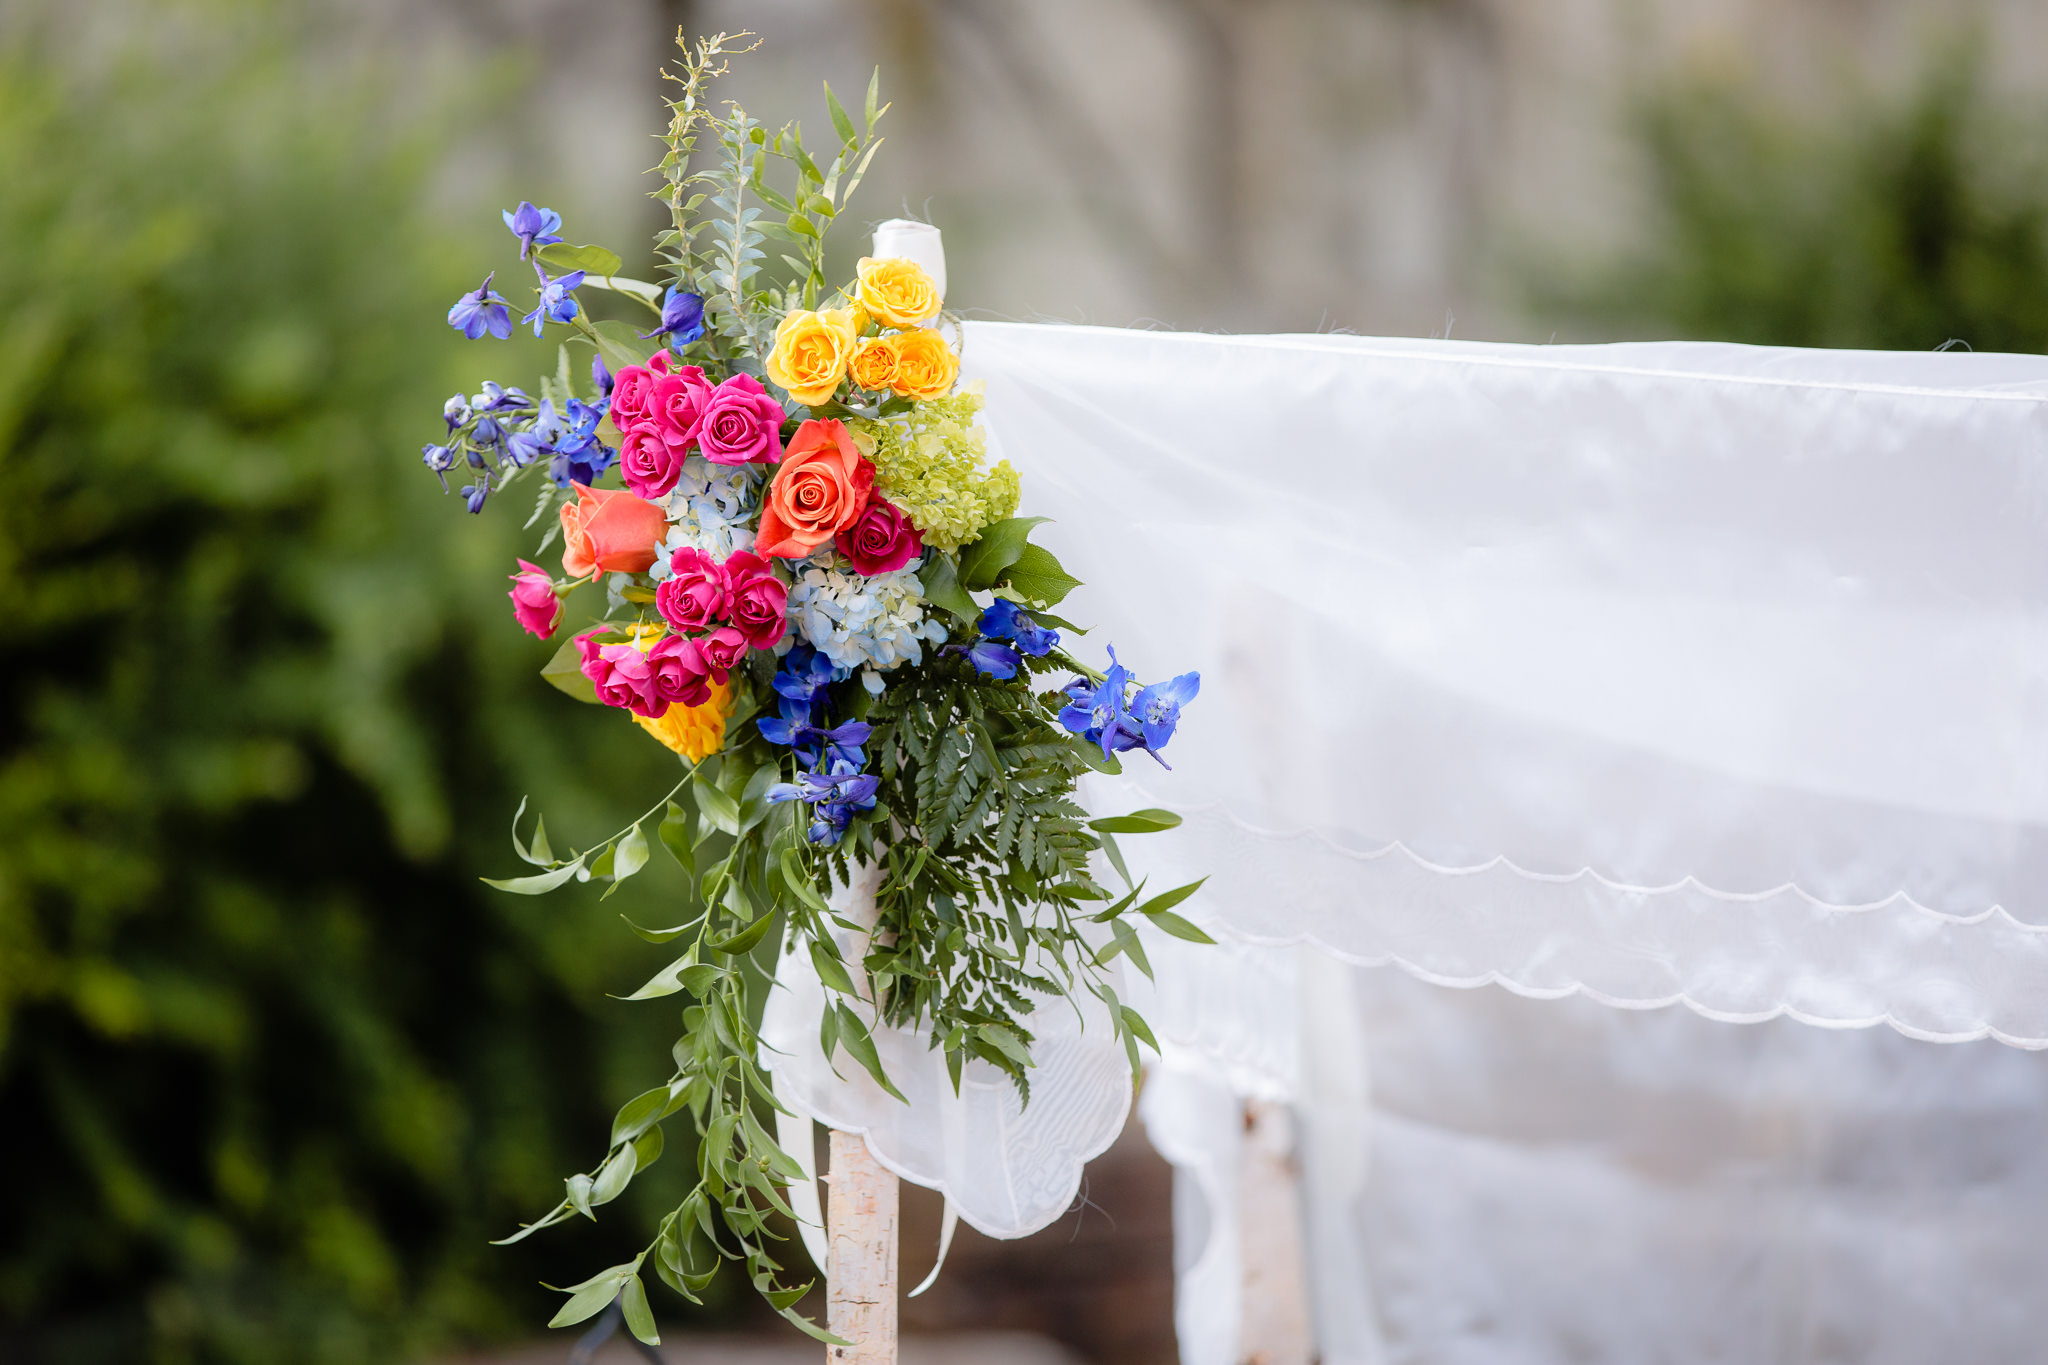 Bright colorful flowers adorn the chuppah at a Jewish wedding ceremony at Phipps Conservatory